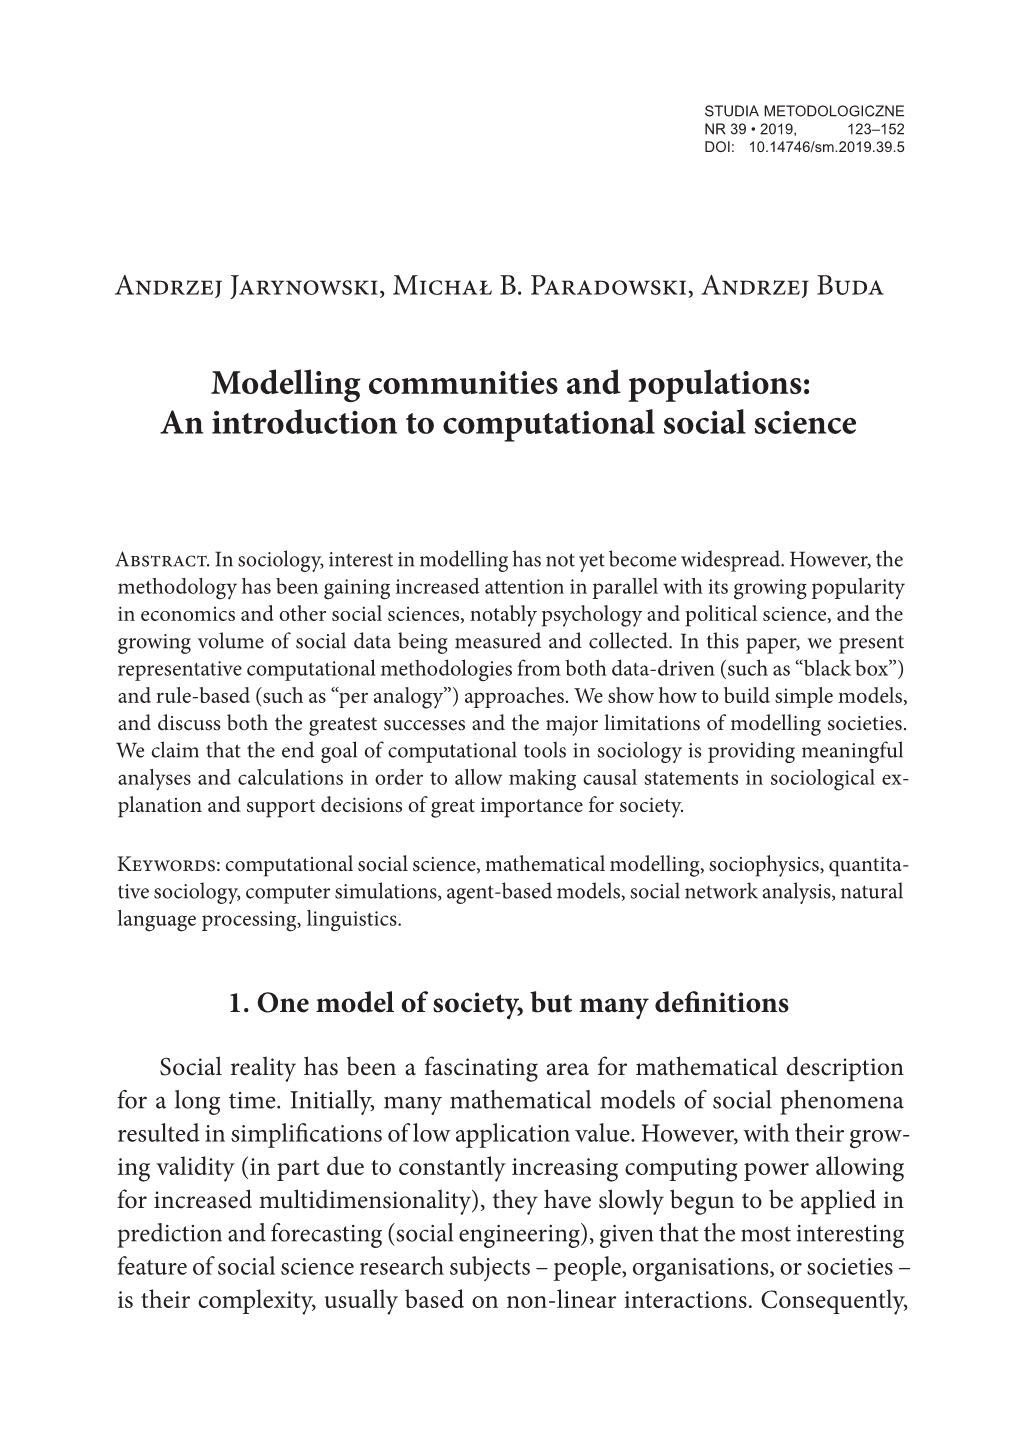 Modelling Communities and Populations: an Introduction to Computational Social Science